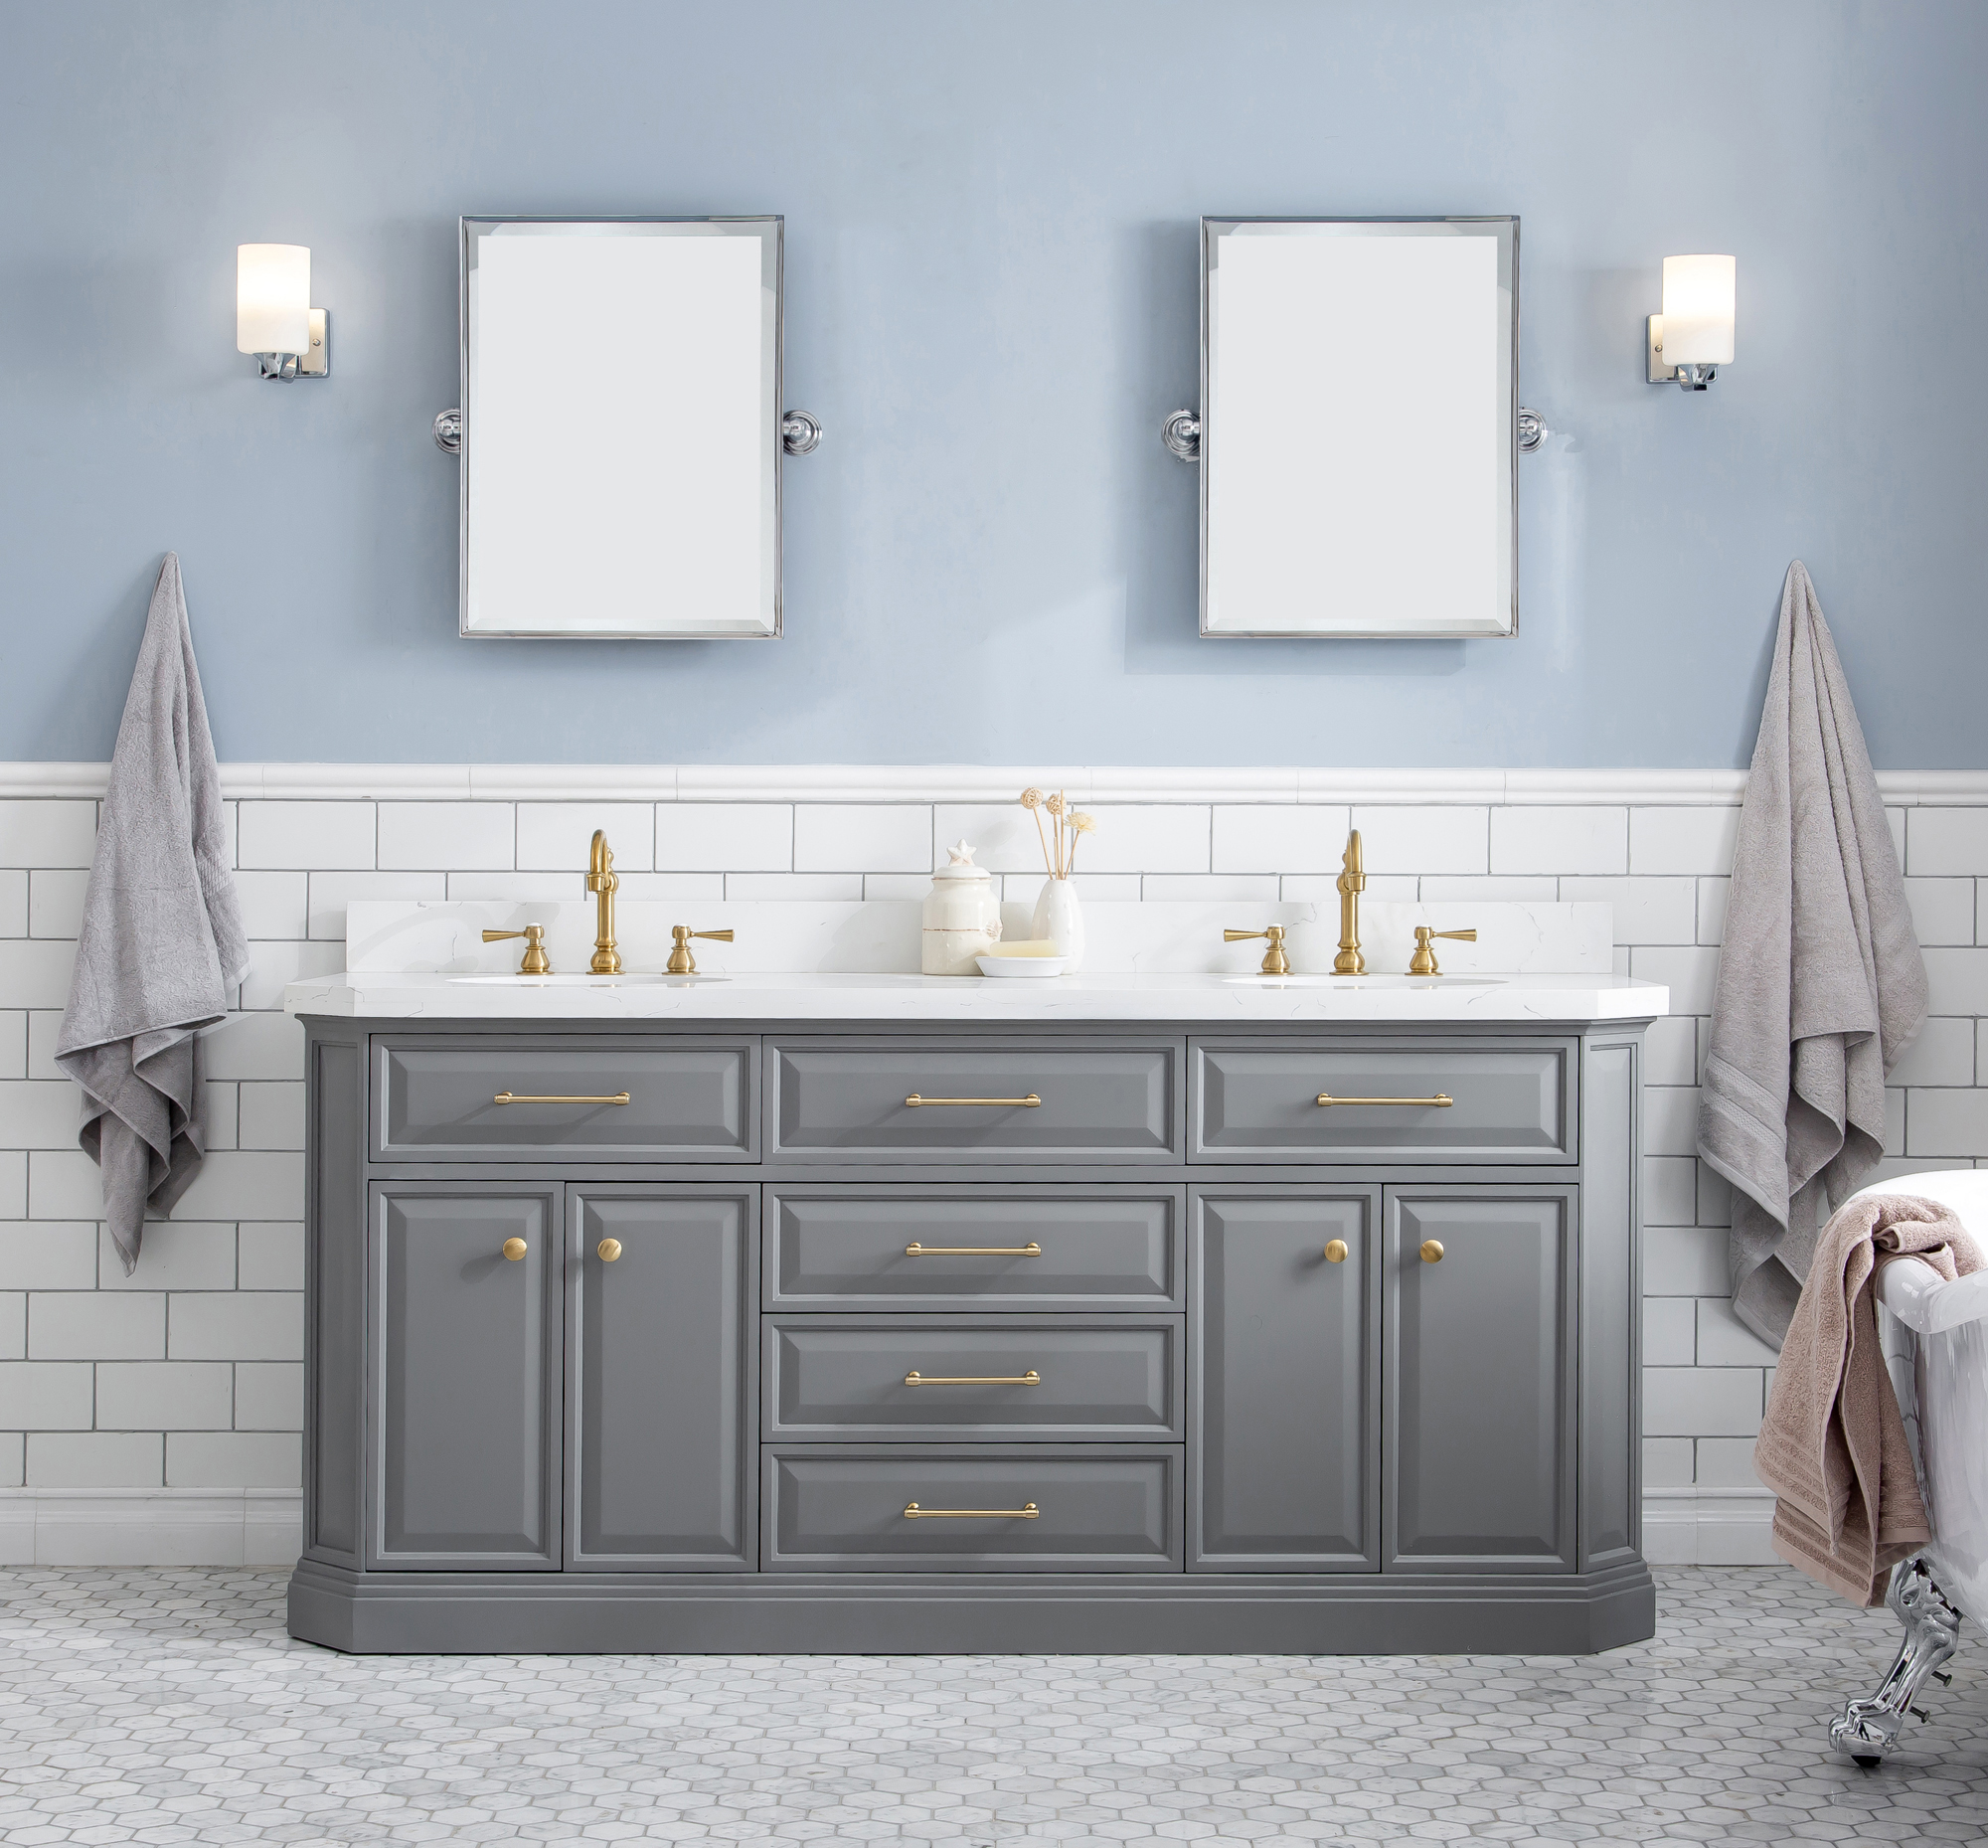 72" Traditional Collection Quartz Carrara Cashmere Grey Bathroom Vanity Set With Hardware in Satin Gold Finish